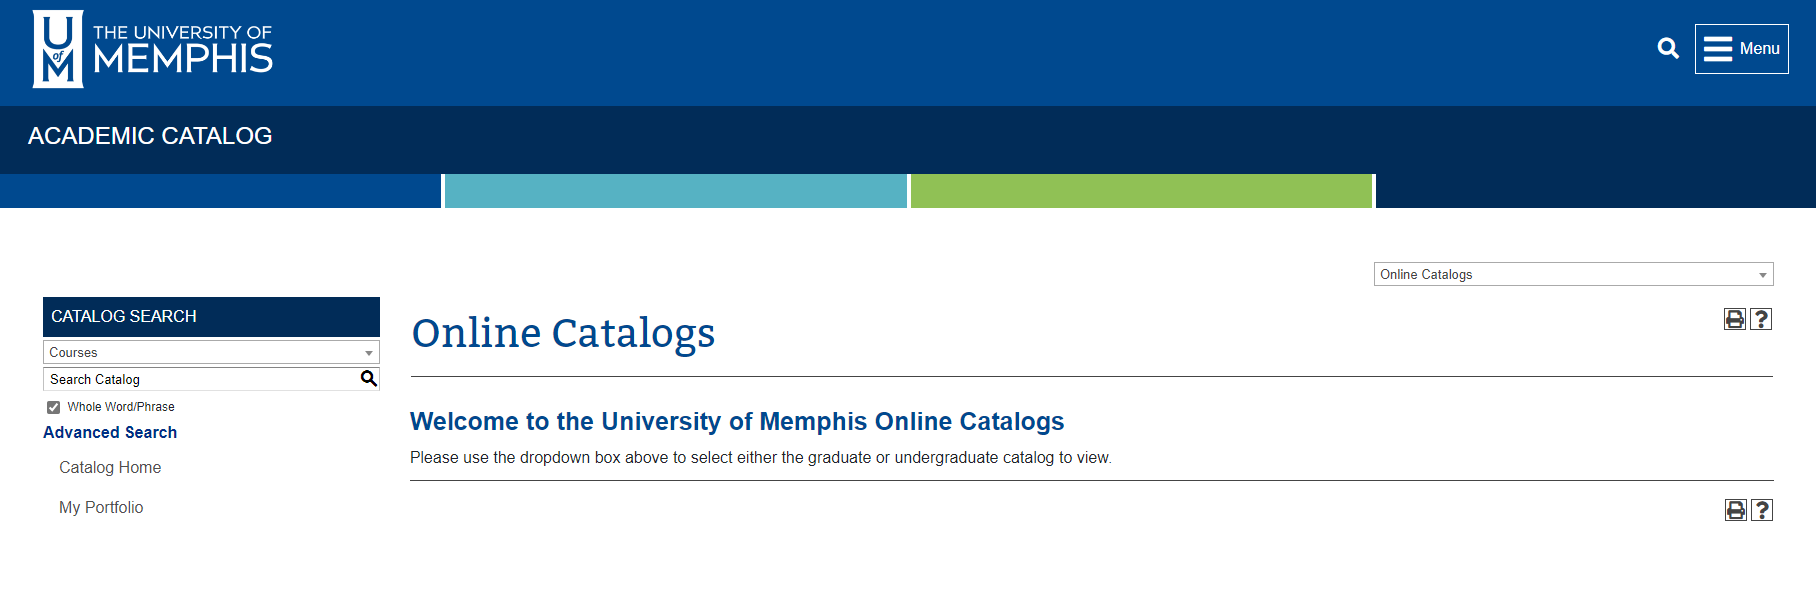 image of the uofm online catalog